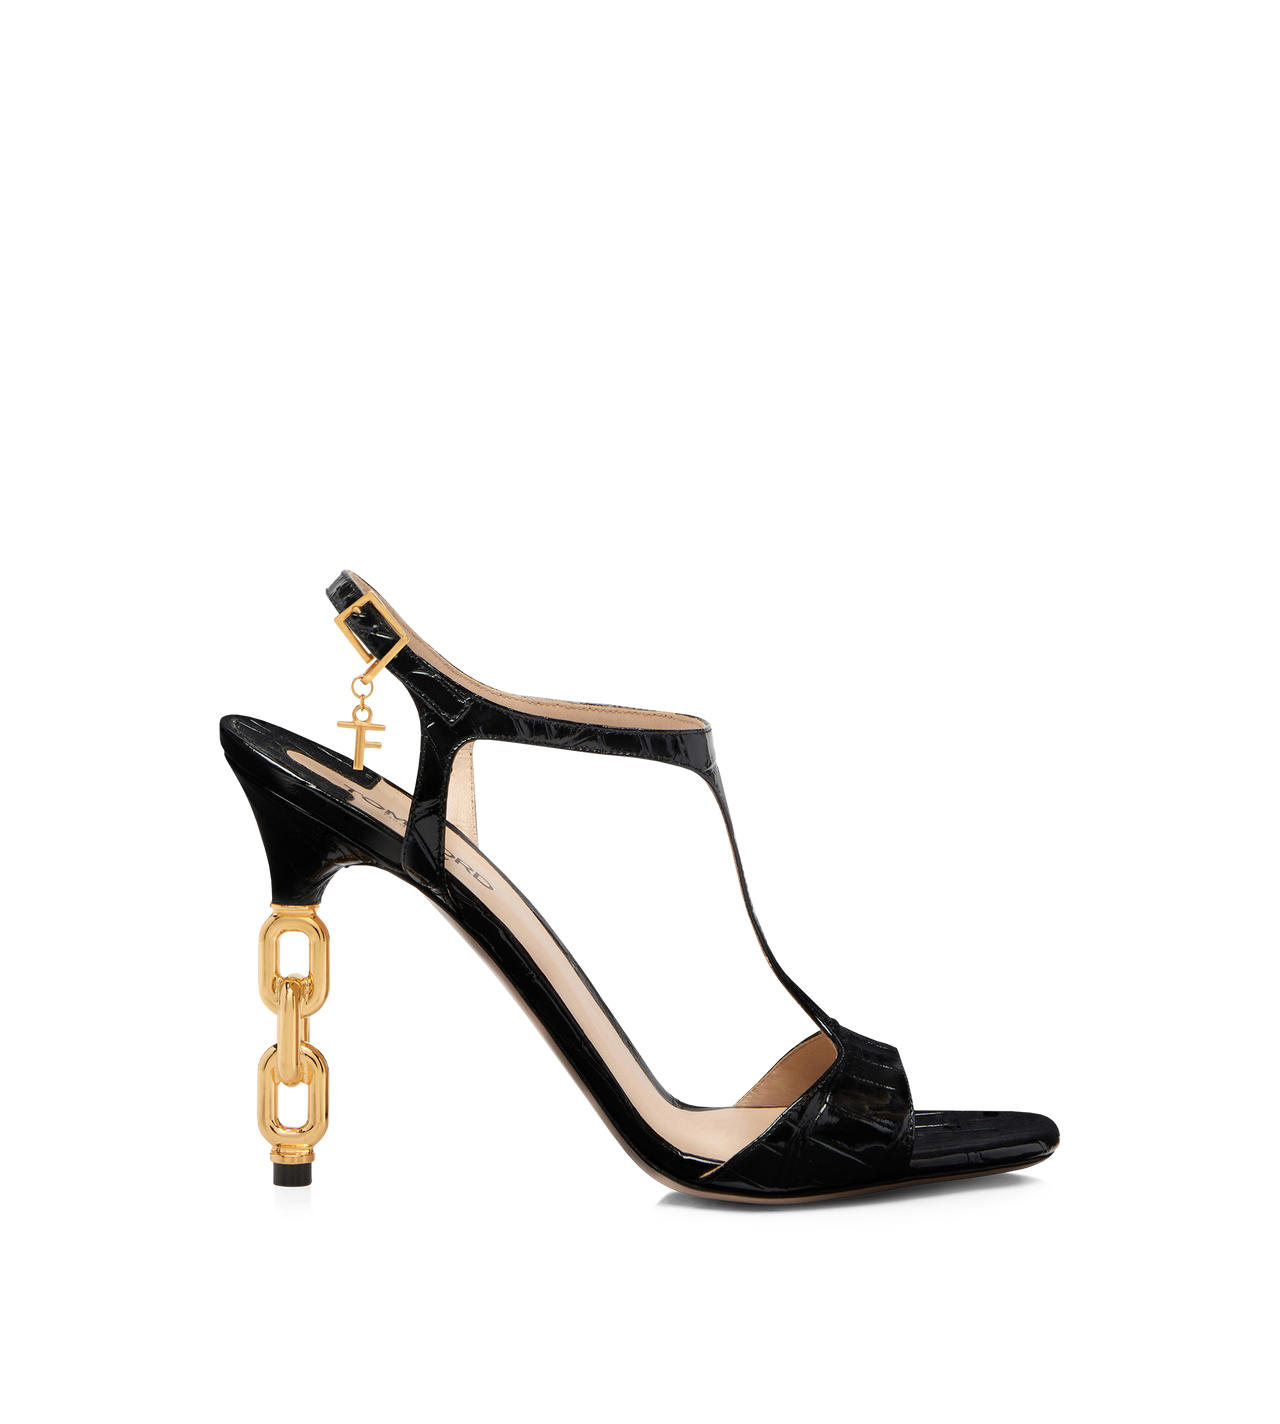 GLOSSY STAMPED CROCODILE LEATHER GALAXY SANDAL image number 0